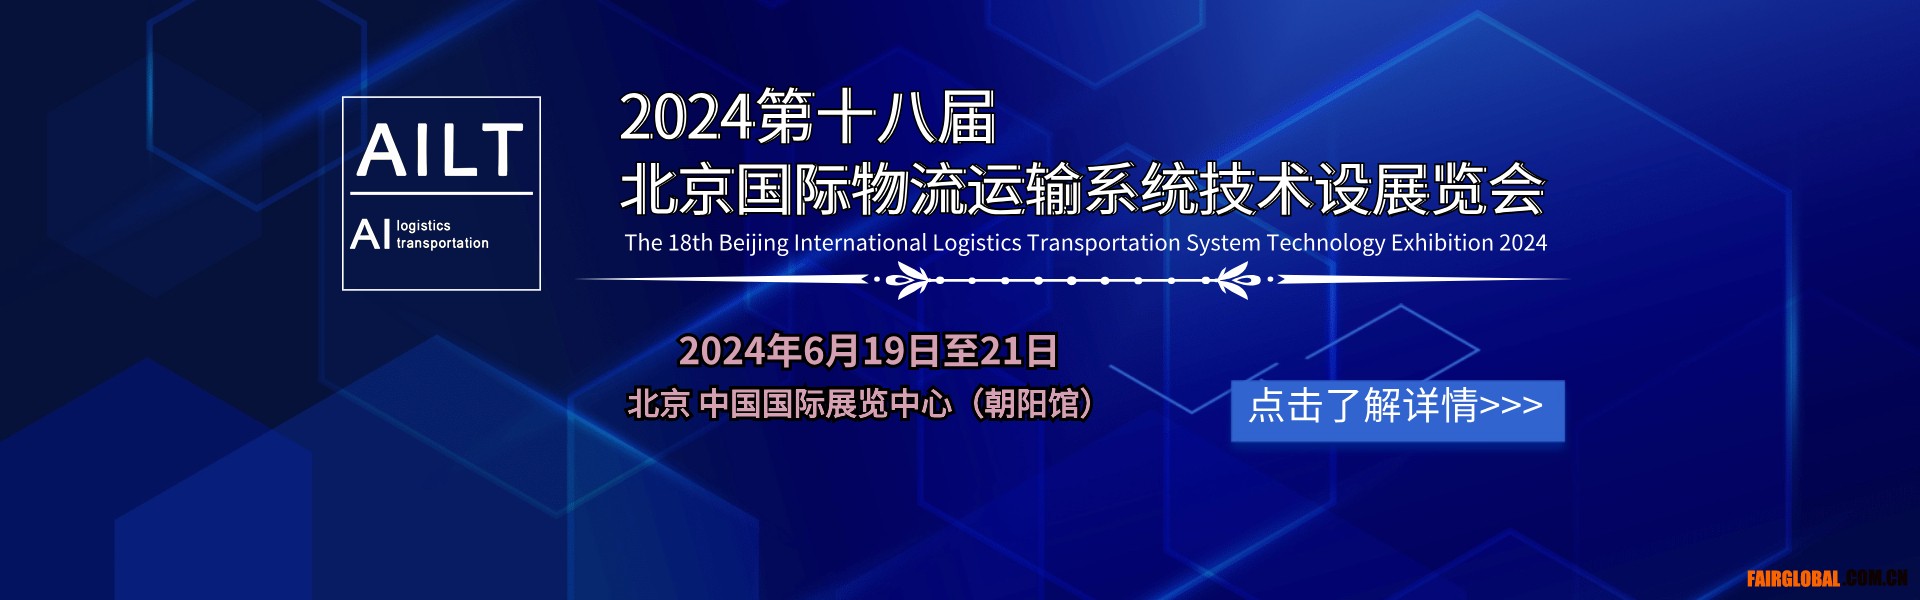 The 18th Beijing International Logistics and Transportation System Technology Equipment Exhibition in 2024 - www.globalomp.com